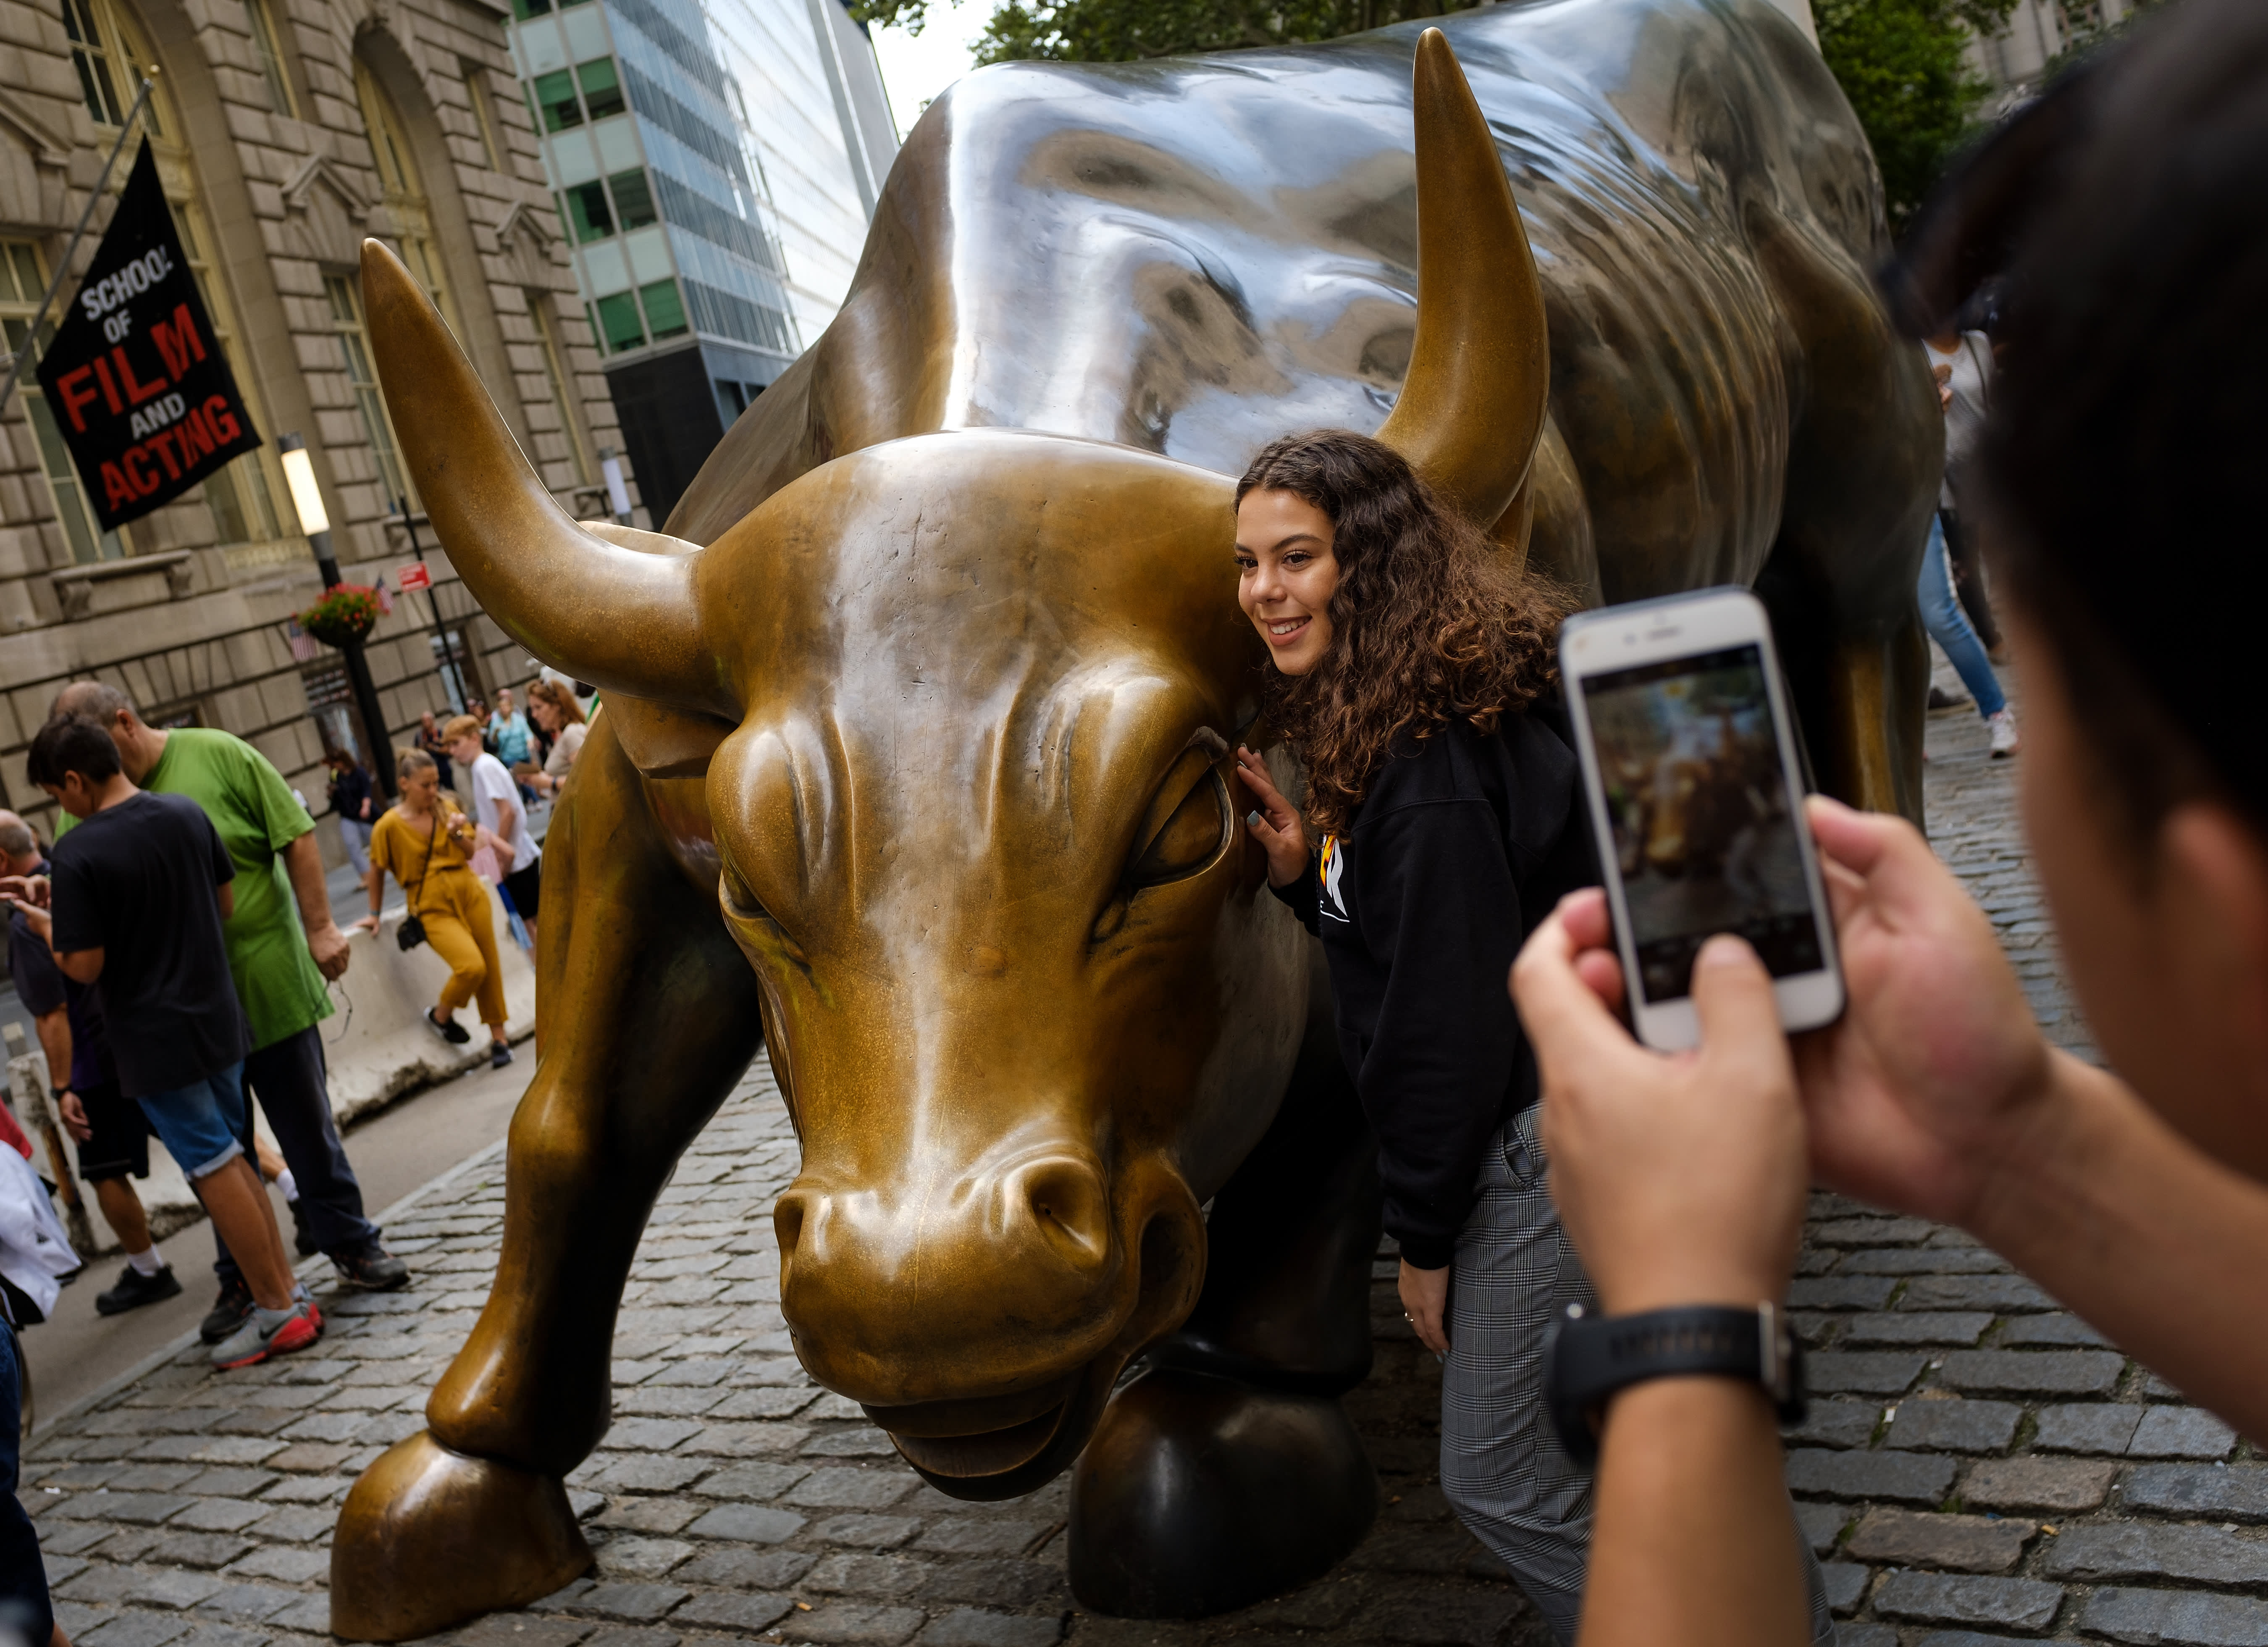 Bull market’s biggest hopes for 2022 rest with millennial millionaires